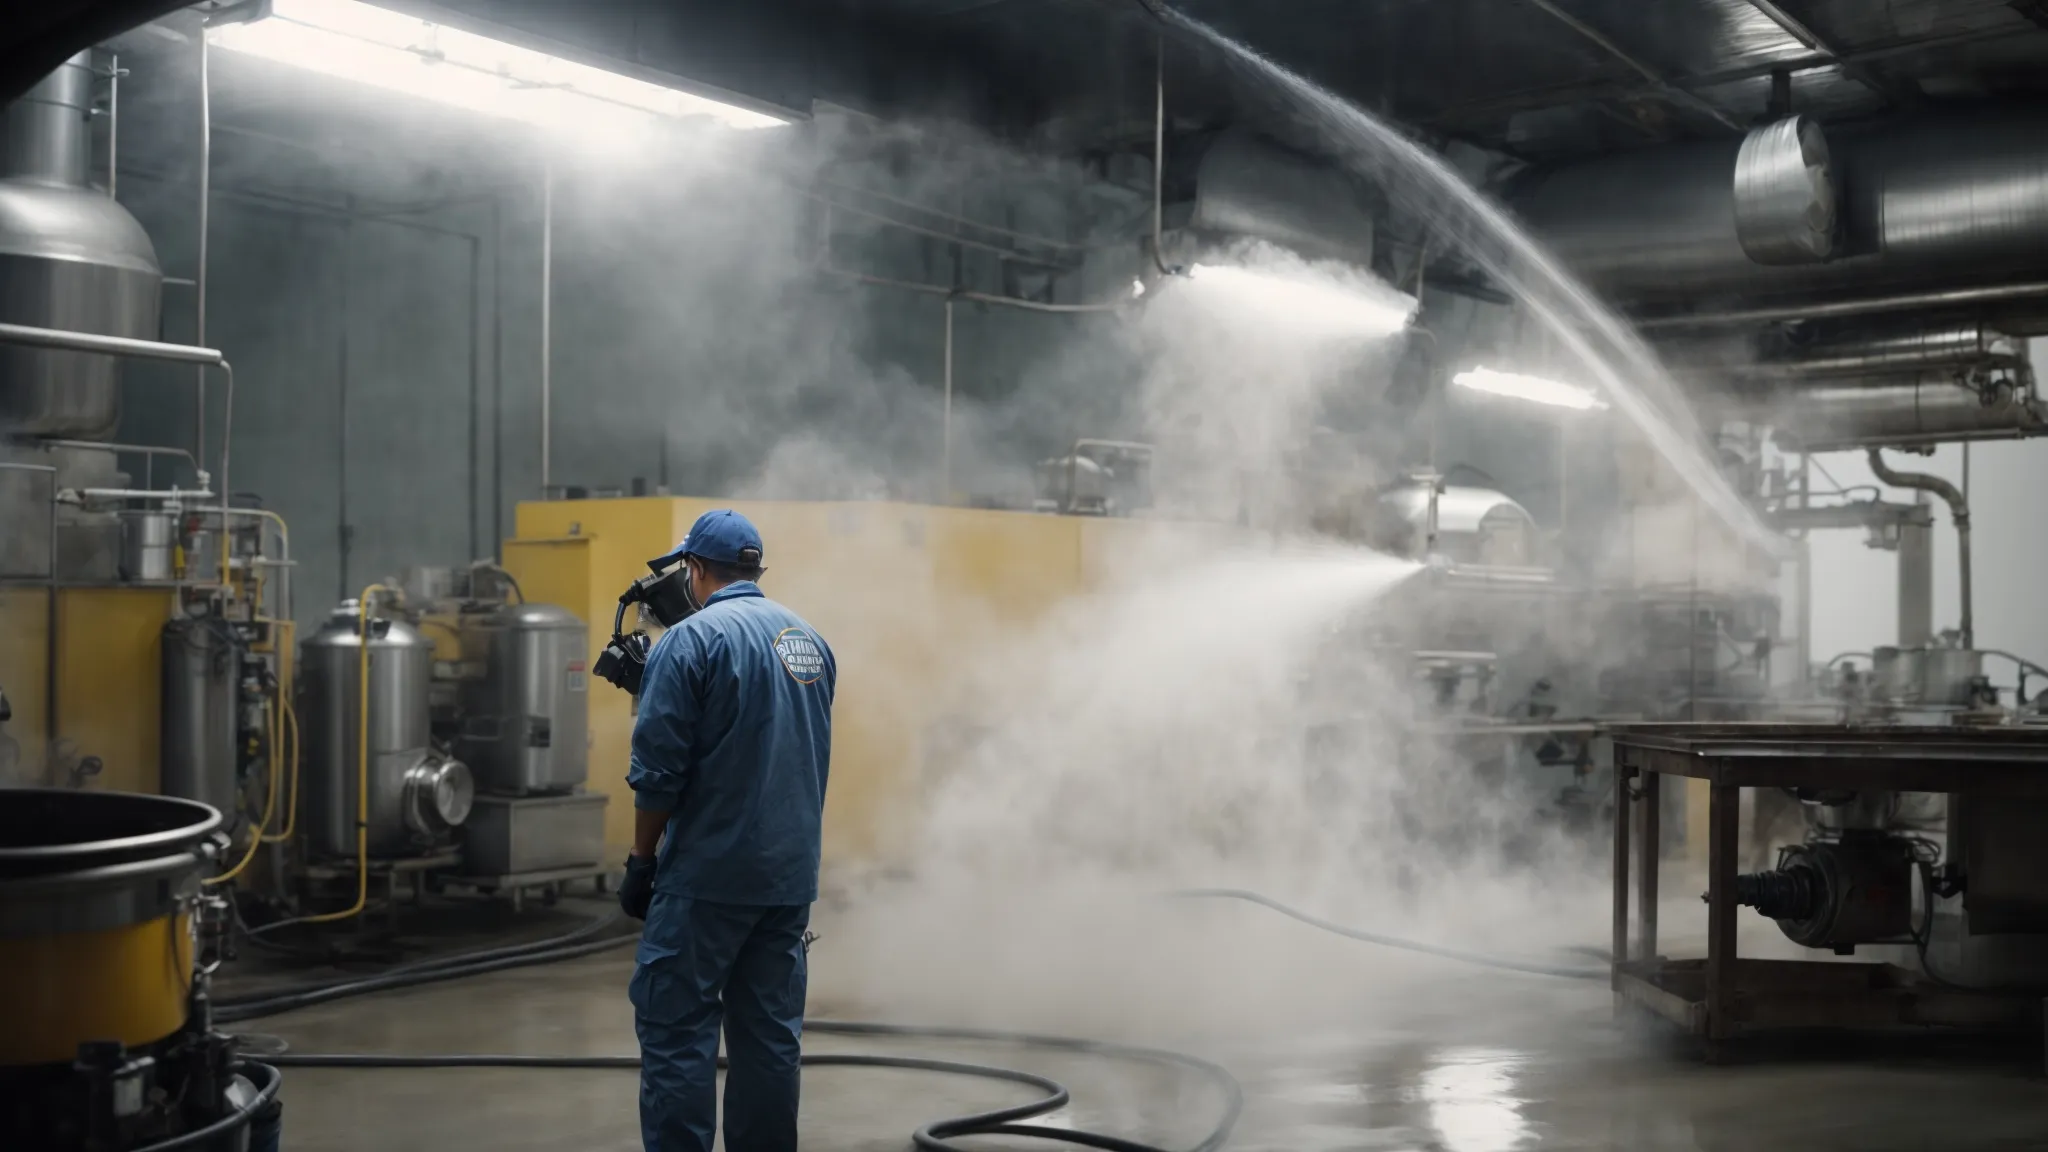 professional cleaners spraying chemicals and pressure washing an industrial kitchen's ductwork and exhaust fan to remove grease buildup.